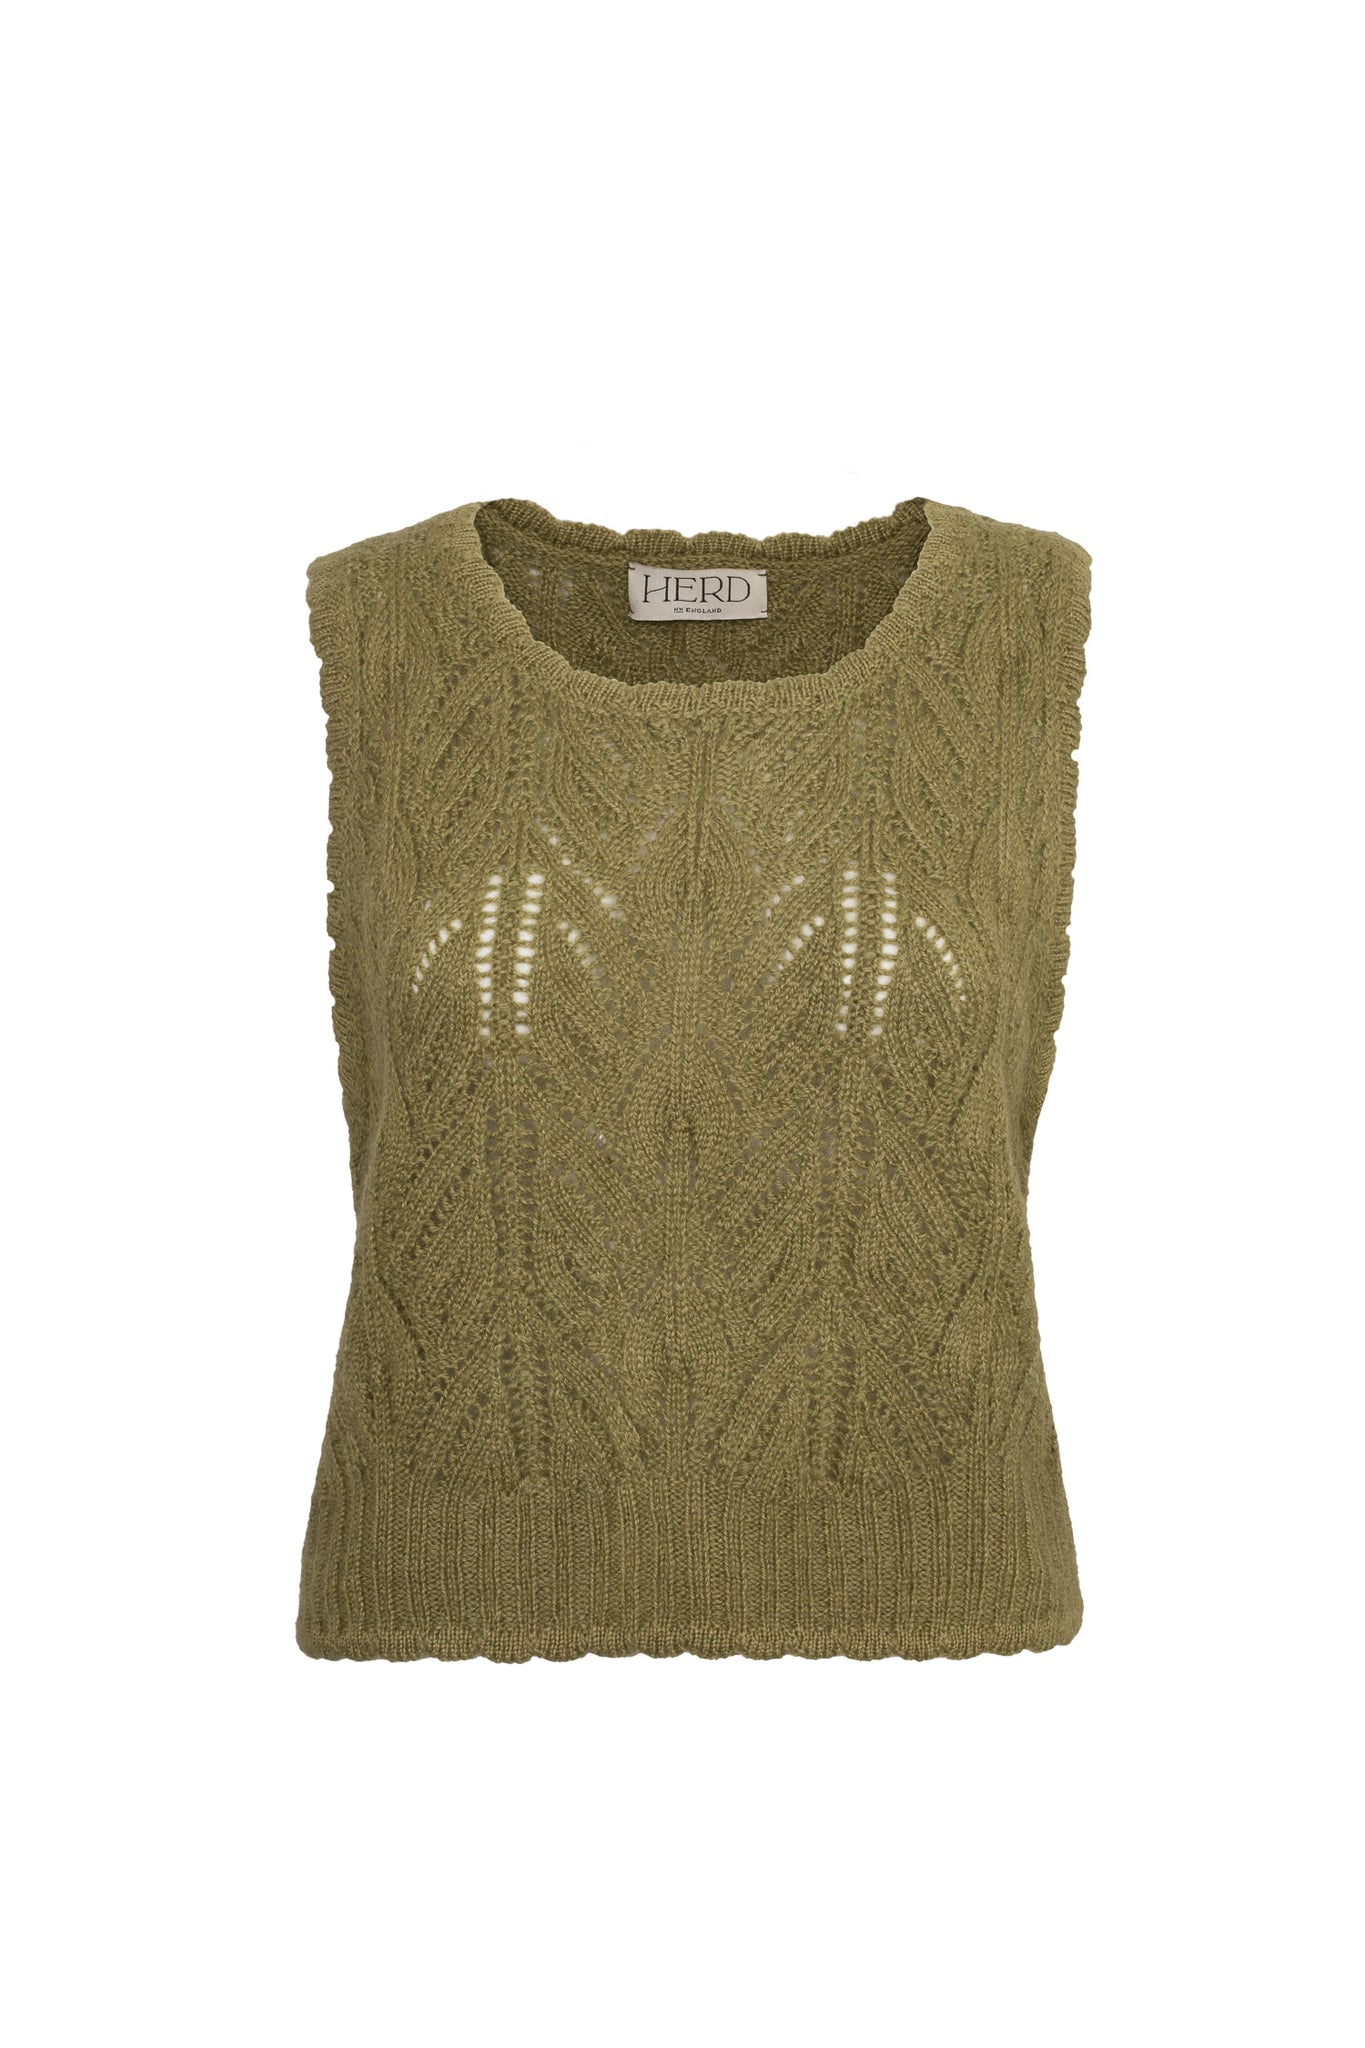 Wyre Vest in Moss